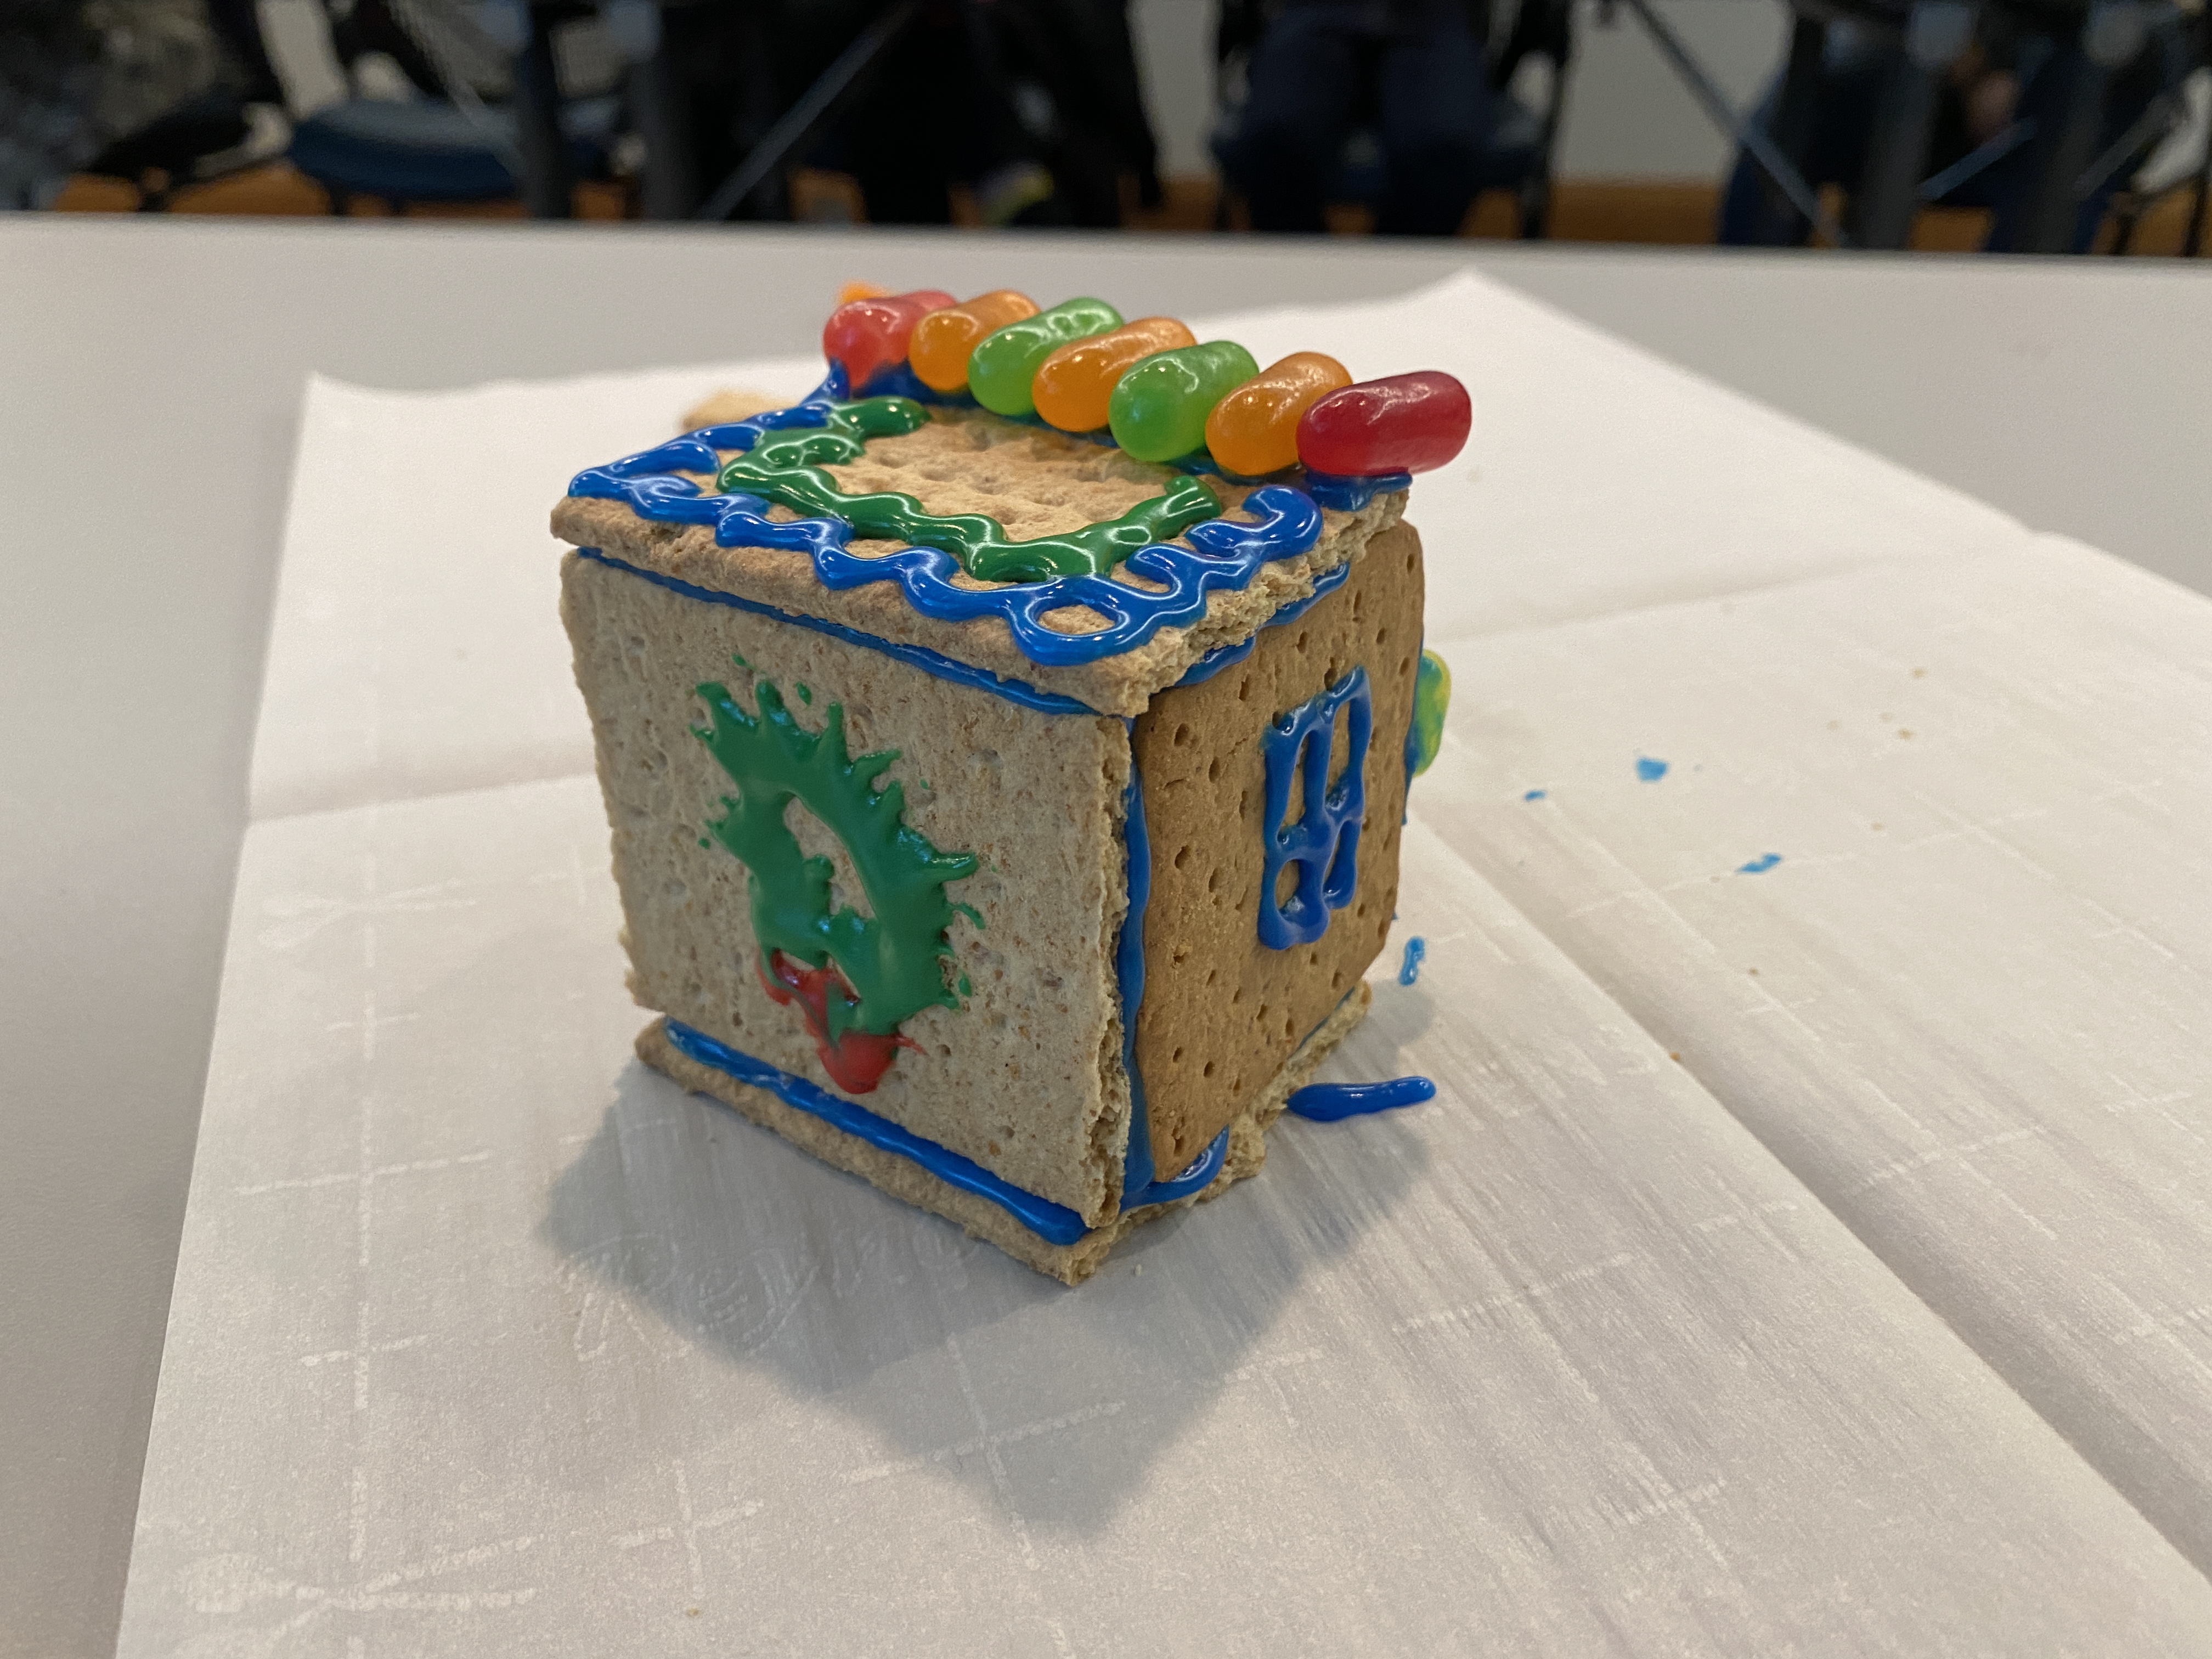 A decorated graham cracker house